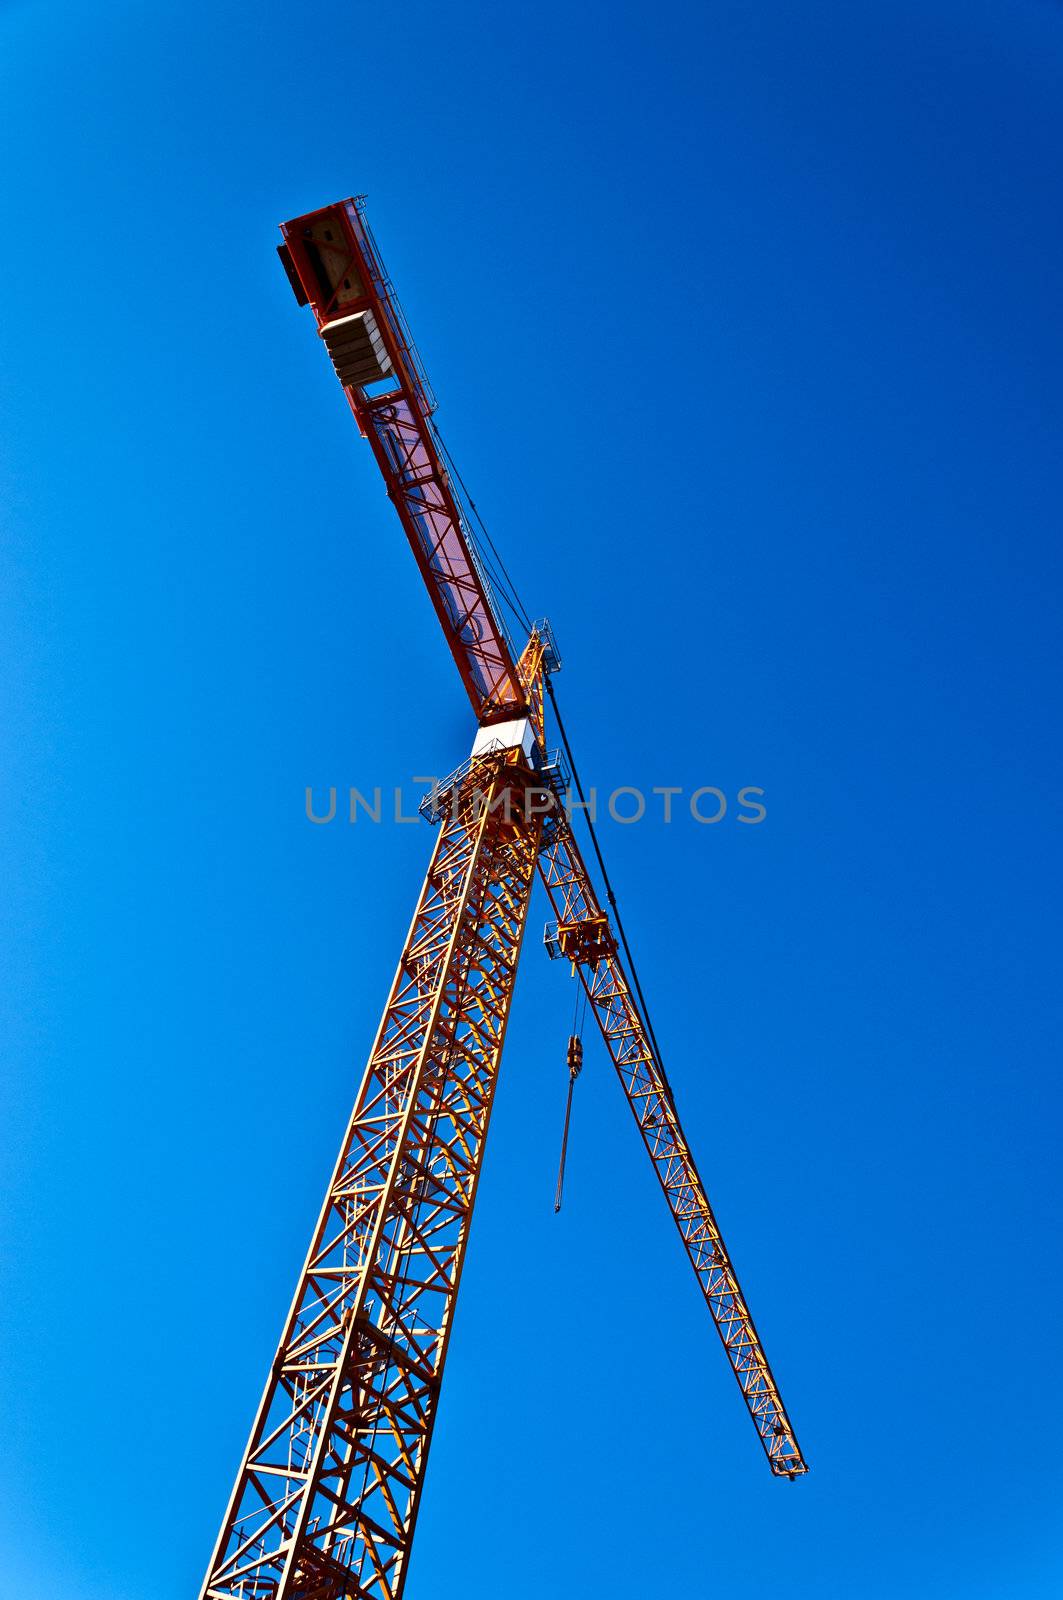 Tower crane on blue sky background Oslo Norway